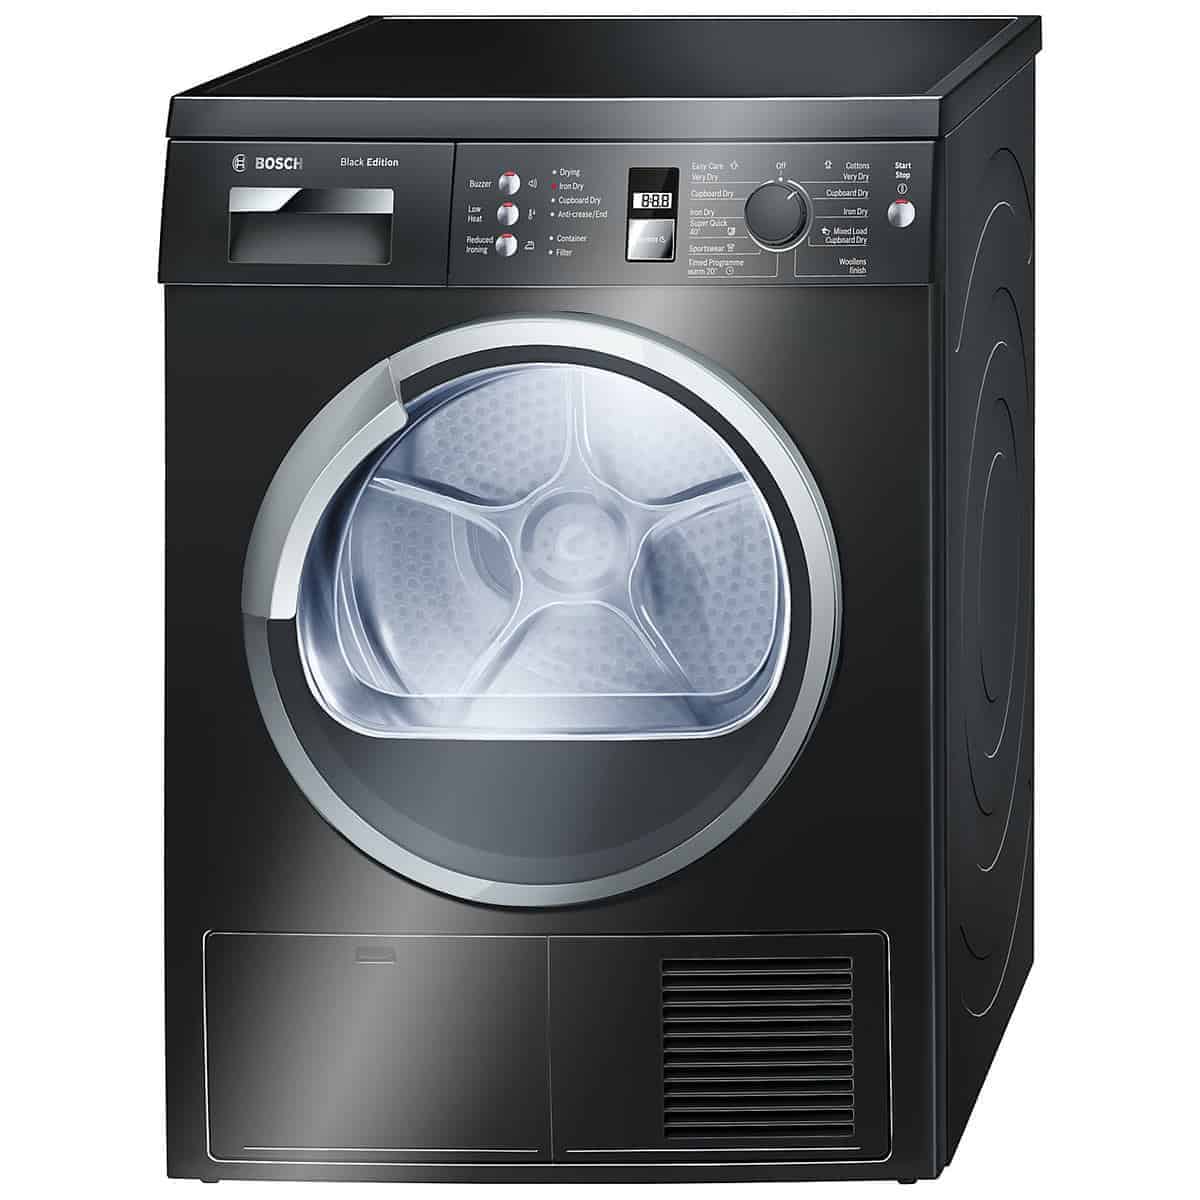 In a spin? How to choose the perfect tumble dryer